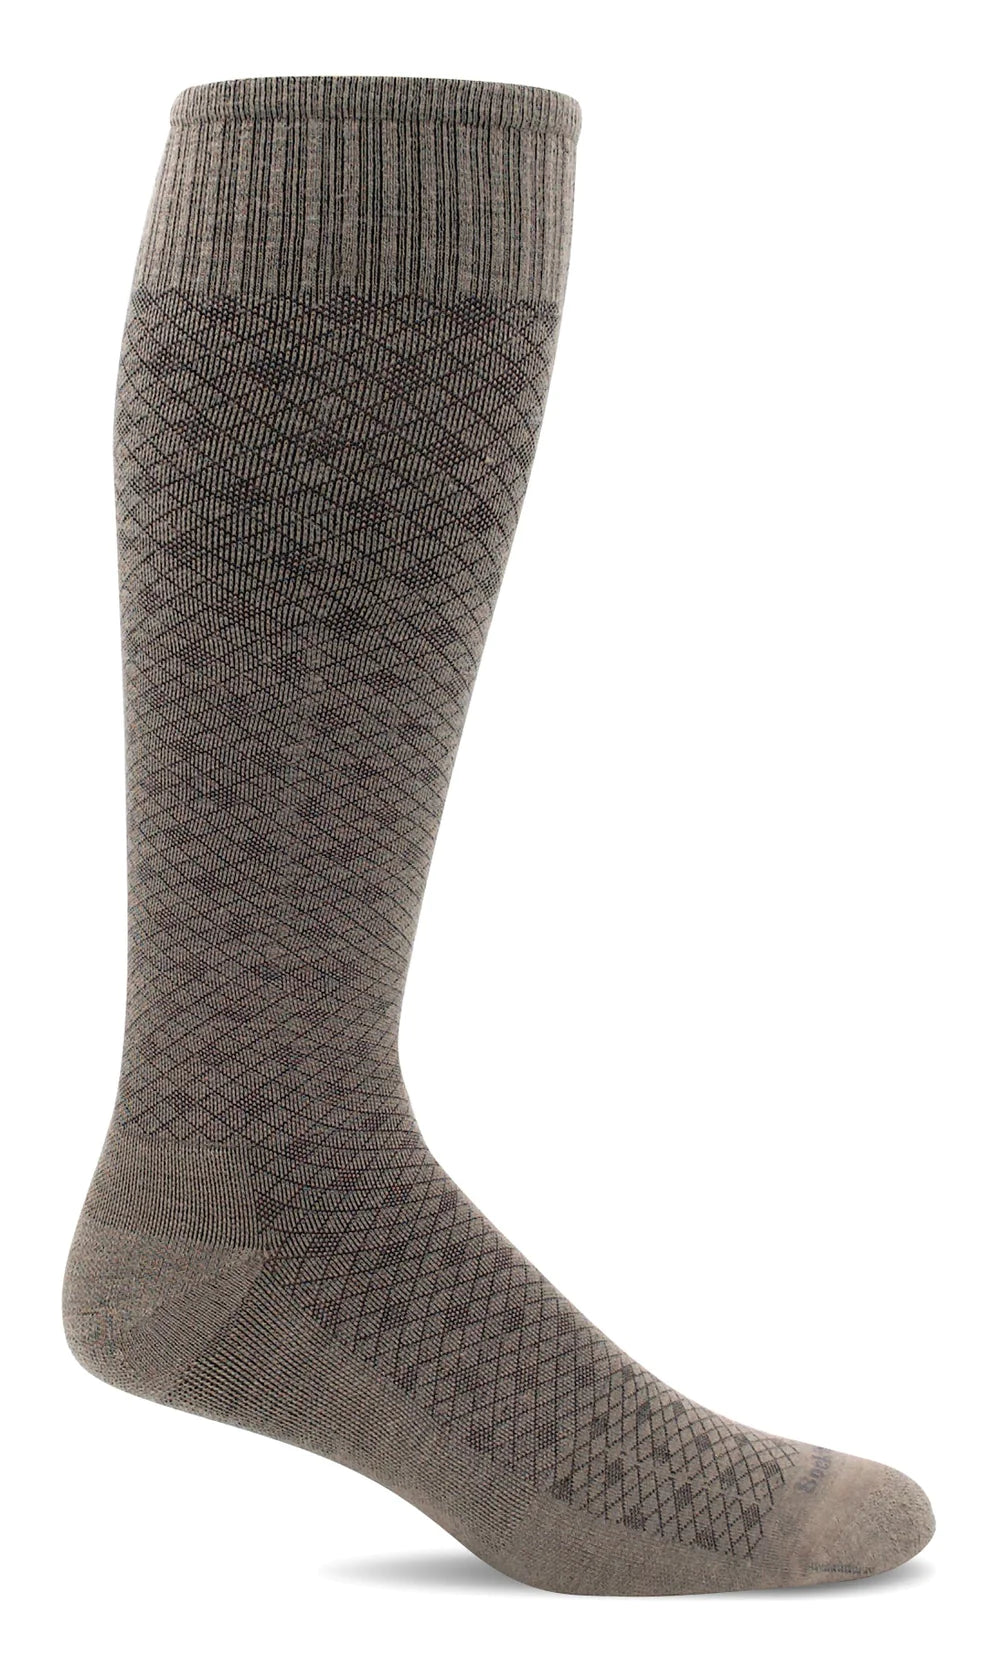 Featherweight Men's Bamboo/Merino Moderate Compression Socks in Khaki or Charcoal